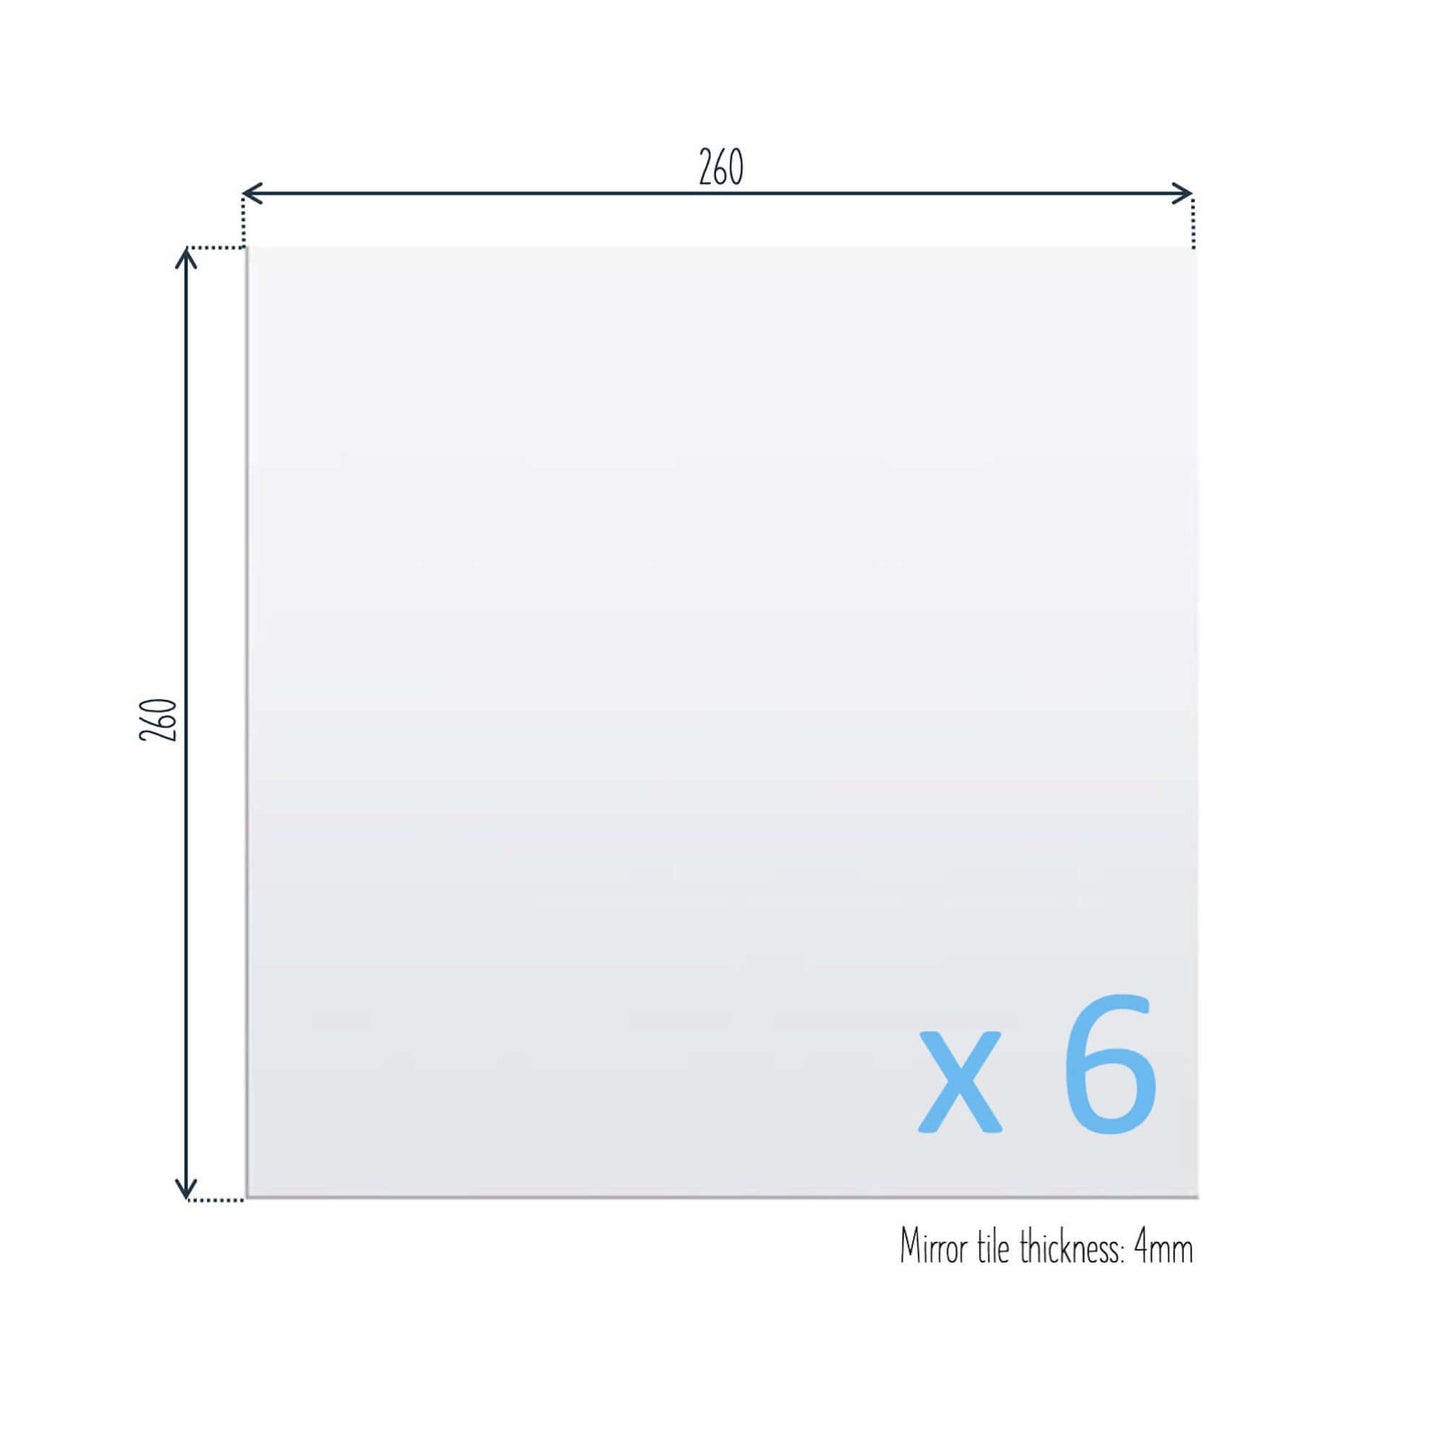 Kendall Self-Adhesive Silver Glass Mirror Tiles, Use as Full length Mirror or Create your own Shape, Set of 6 Square Silver Mirrored Tiles, 260 x 260mm per tile - Accessories